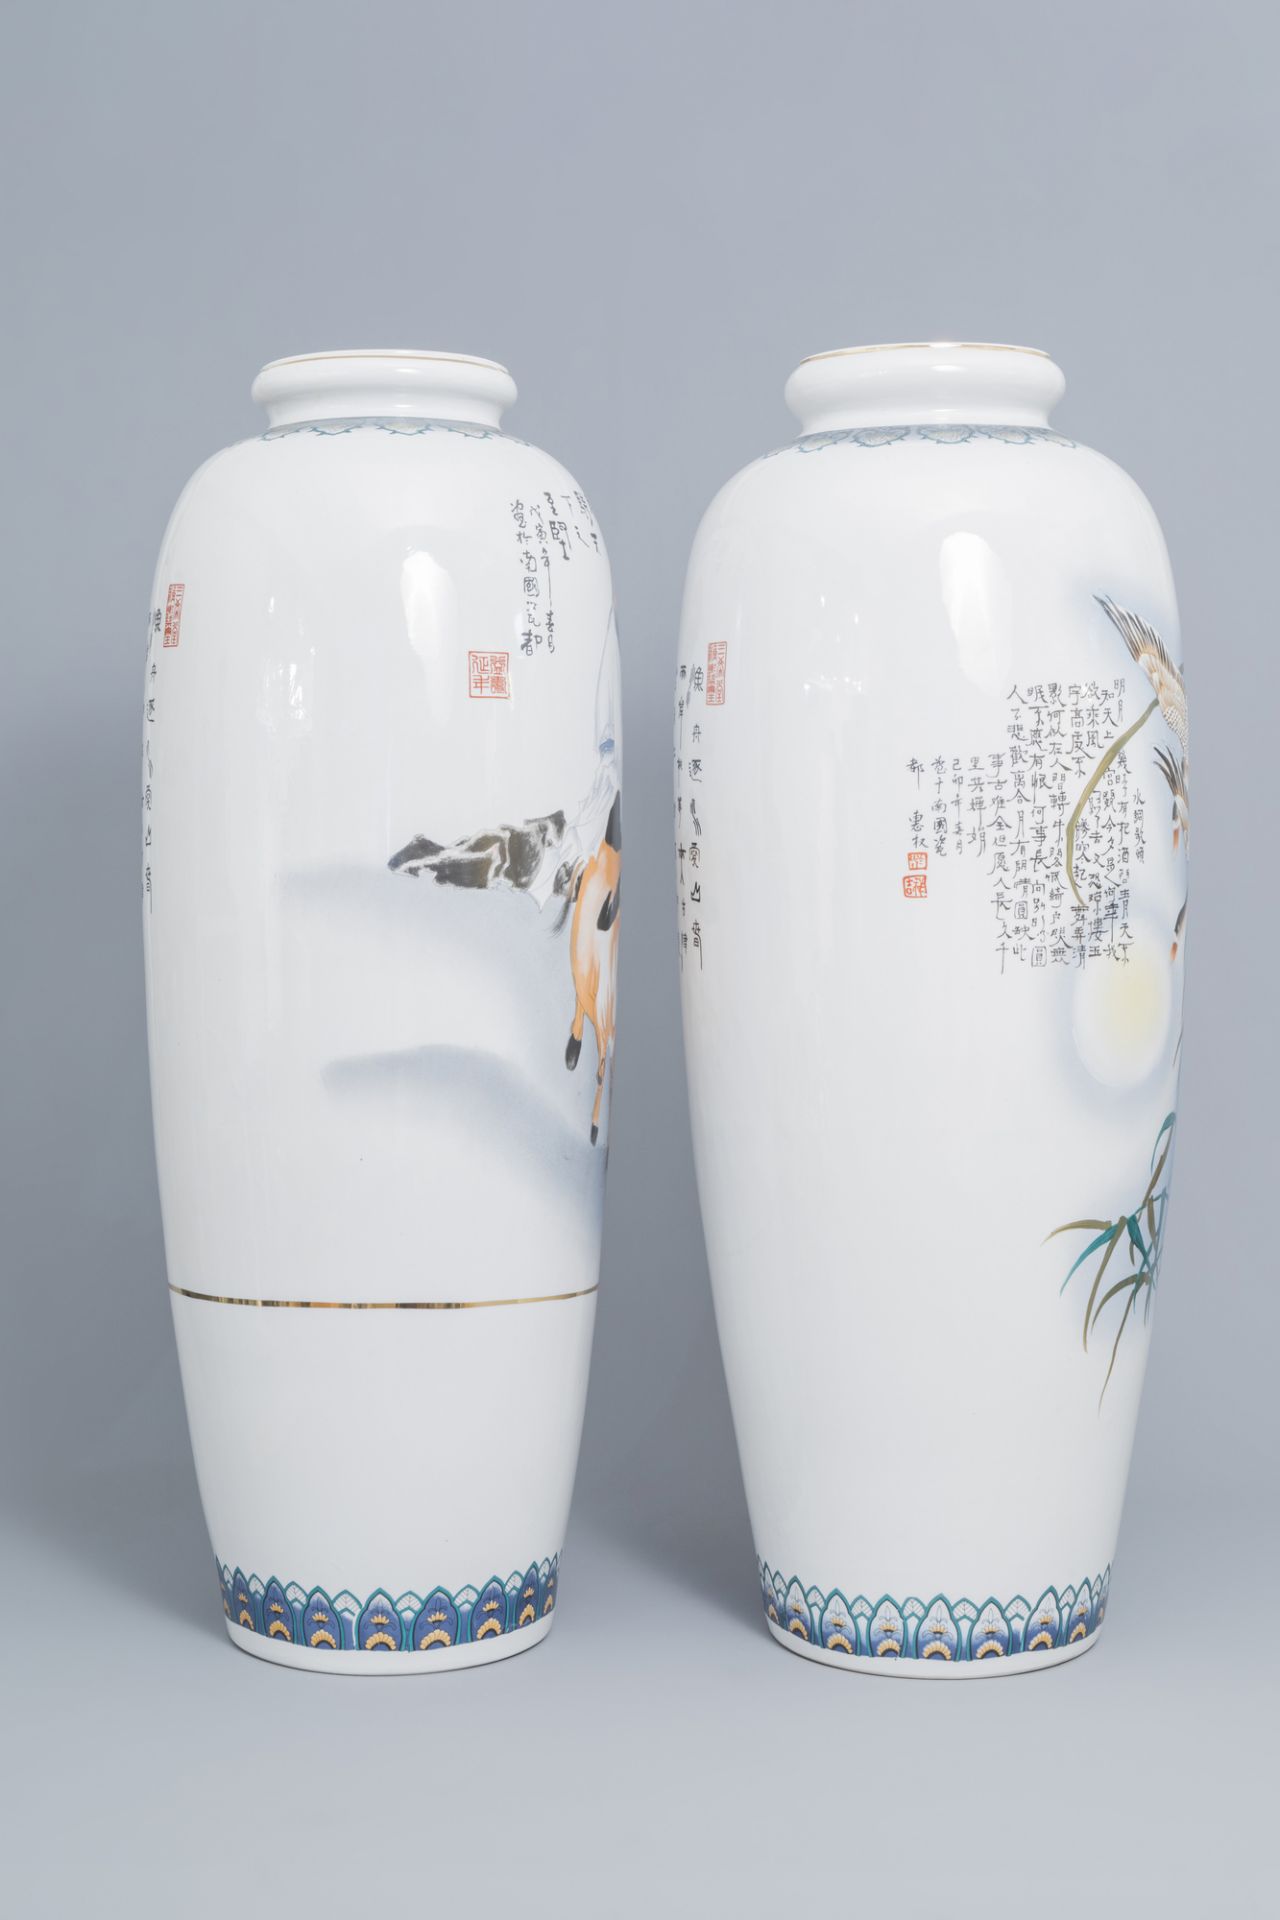 Two large Chinese polychrome vases with ducks and figures in a landscape, 20th C. - Image 3 of 7